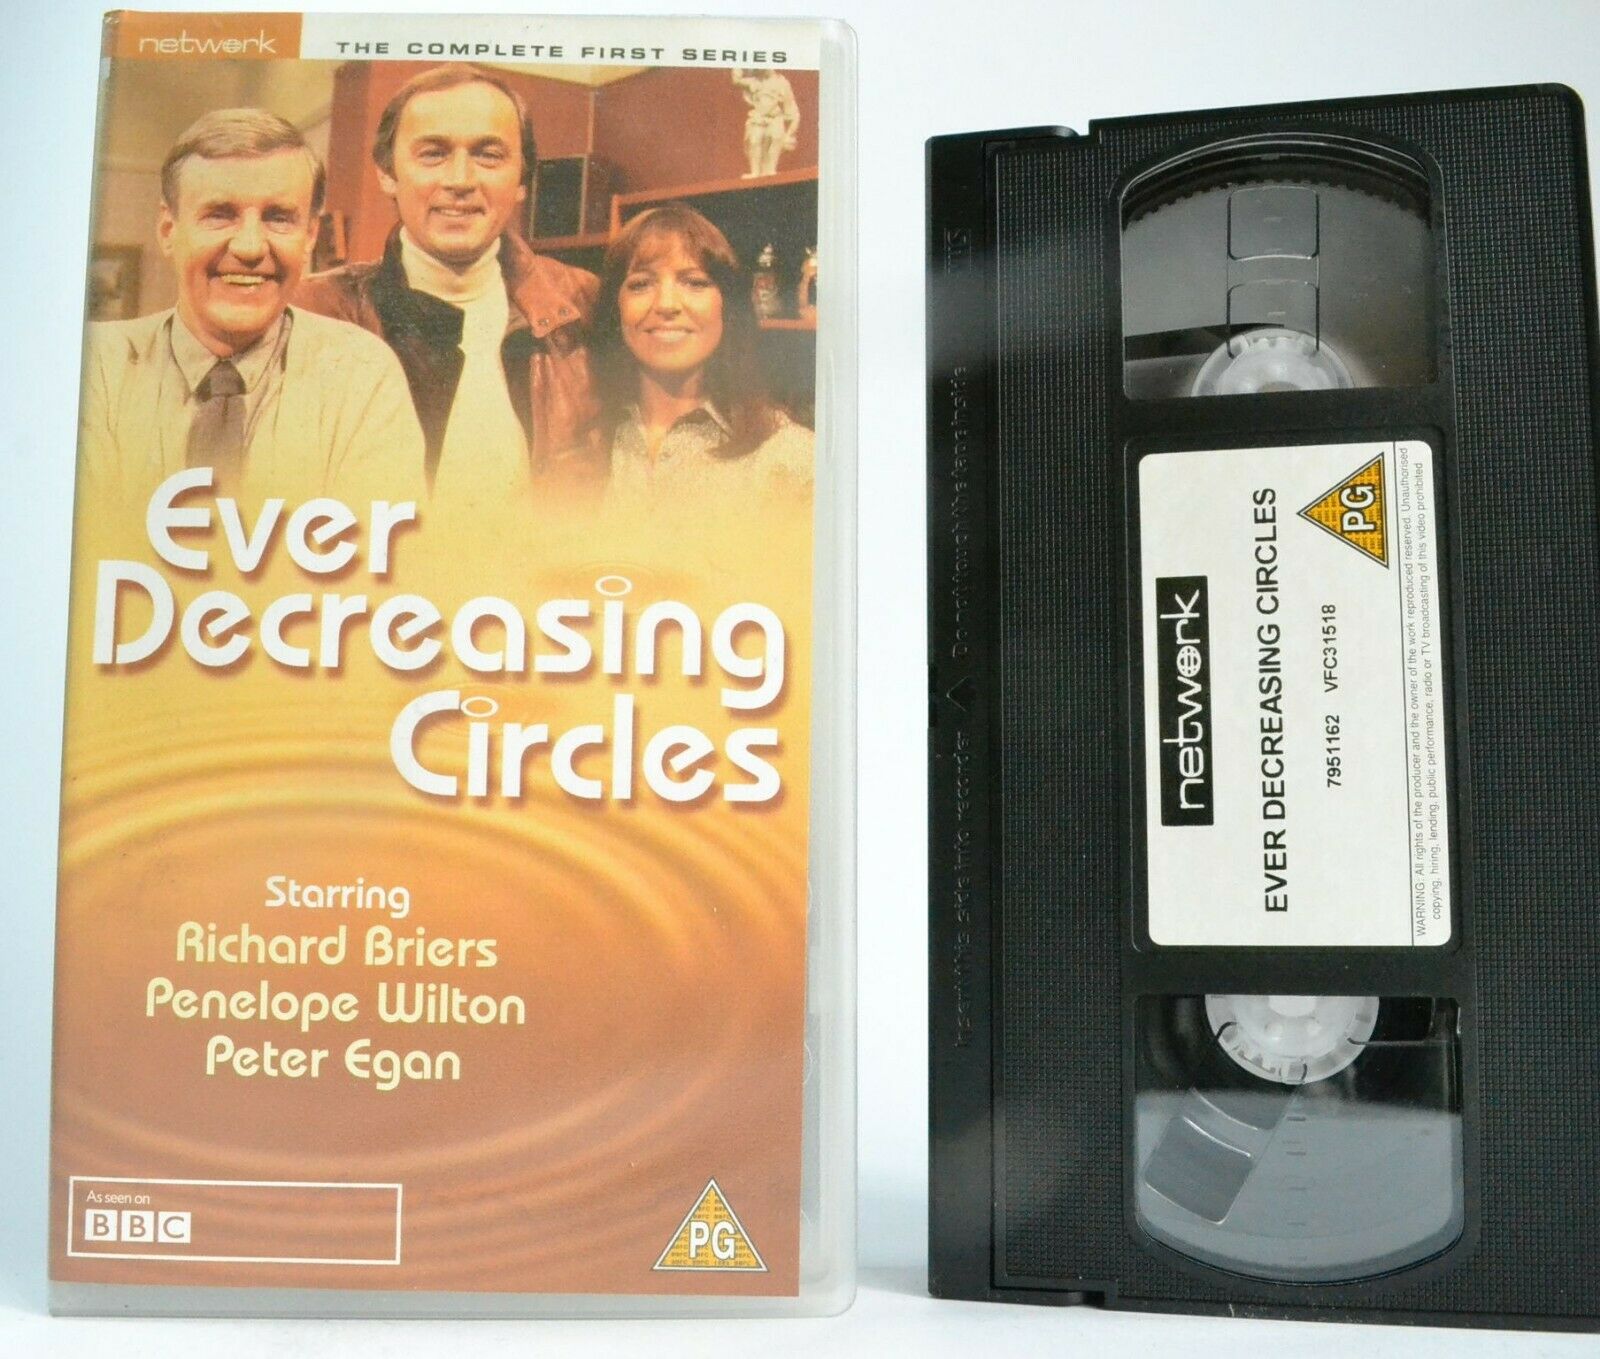 Ever Decreasing Circles [Complete 1st Series] BBC Comedy - Richard Briers - VHS-